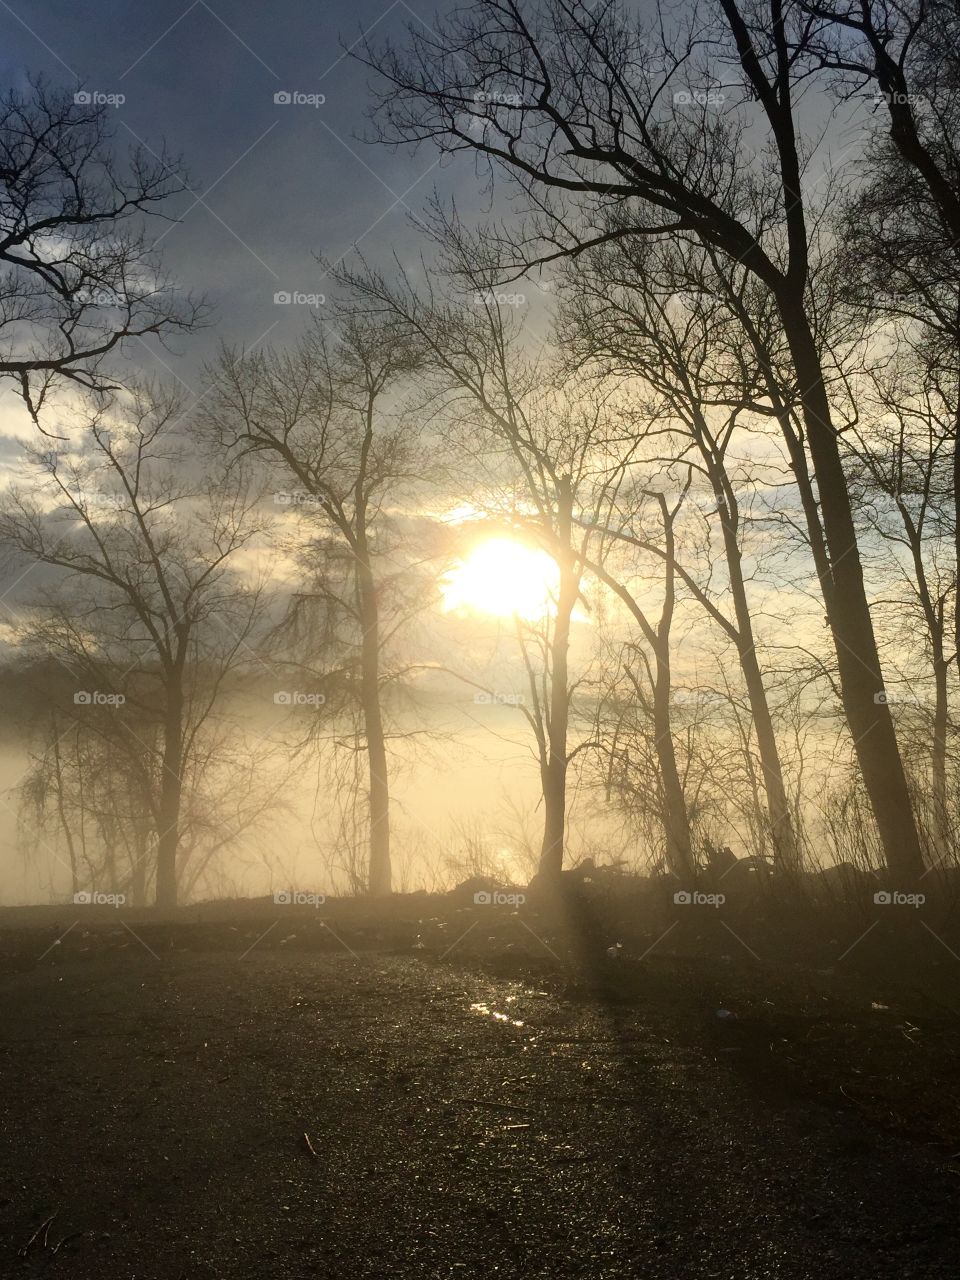 Foggy sunset by the Ohio River